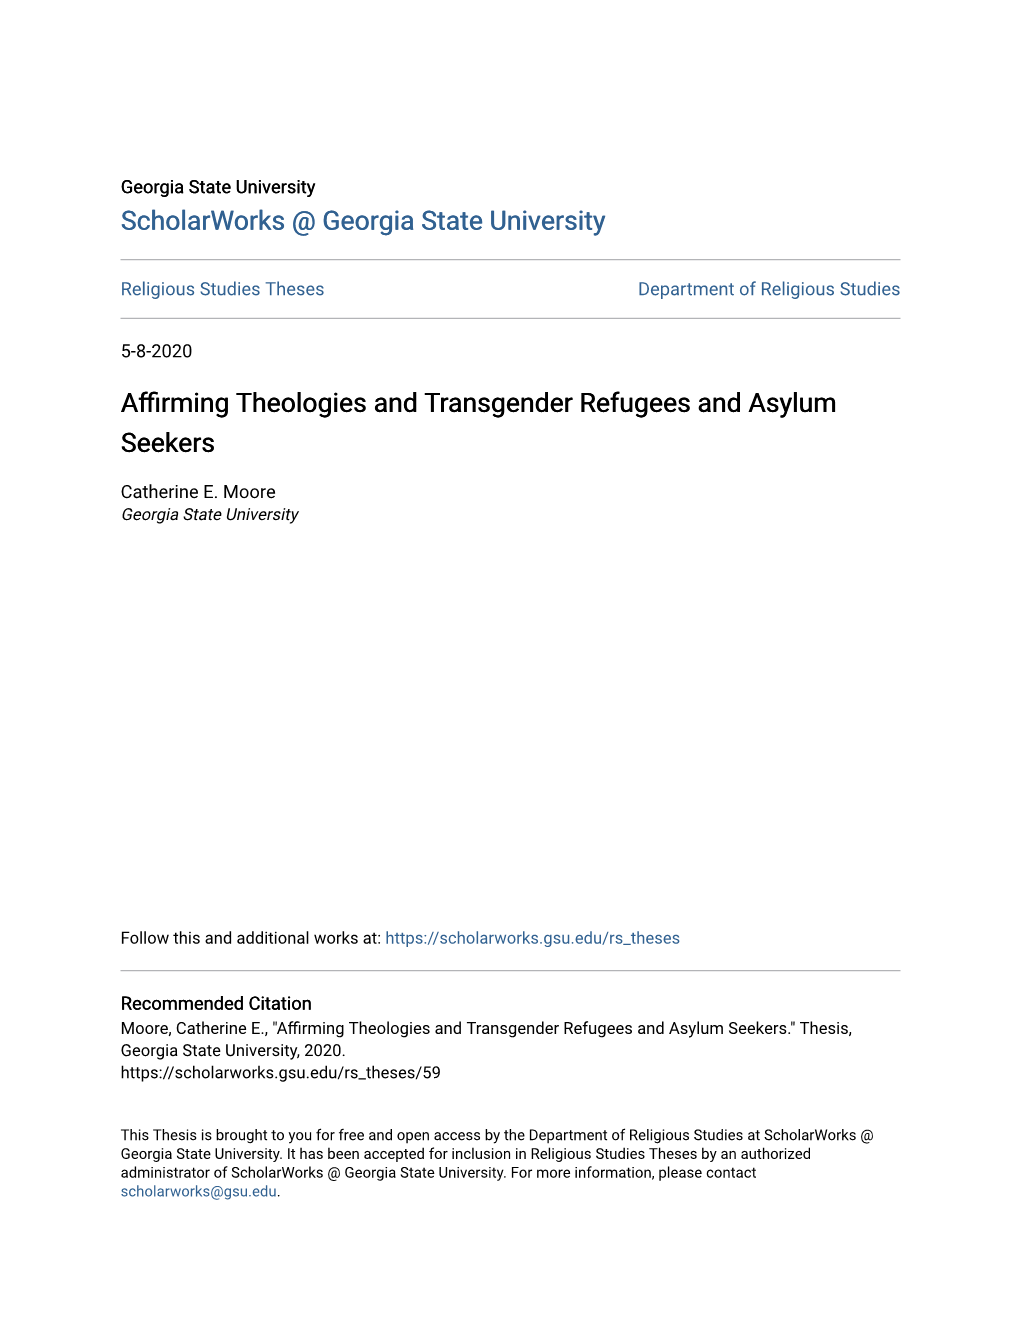 Affirming Theologies and Transgender Refugees and Asylum Seekers